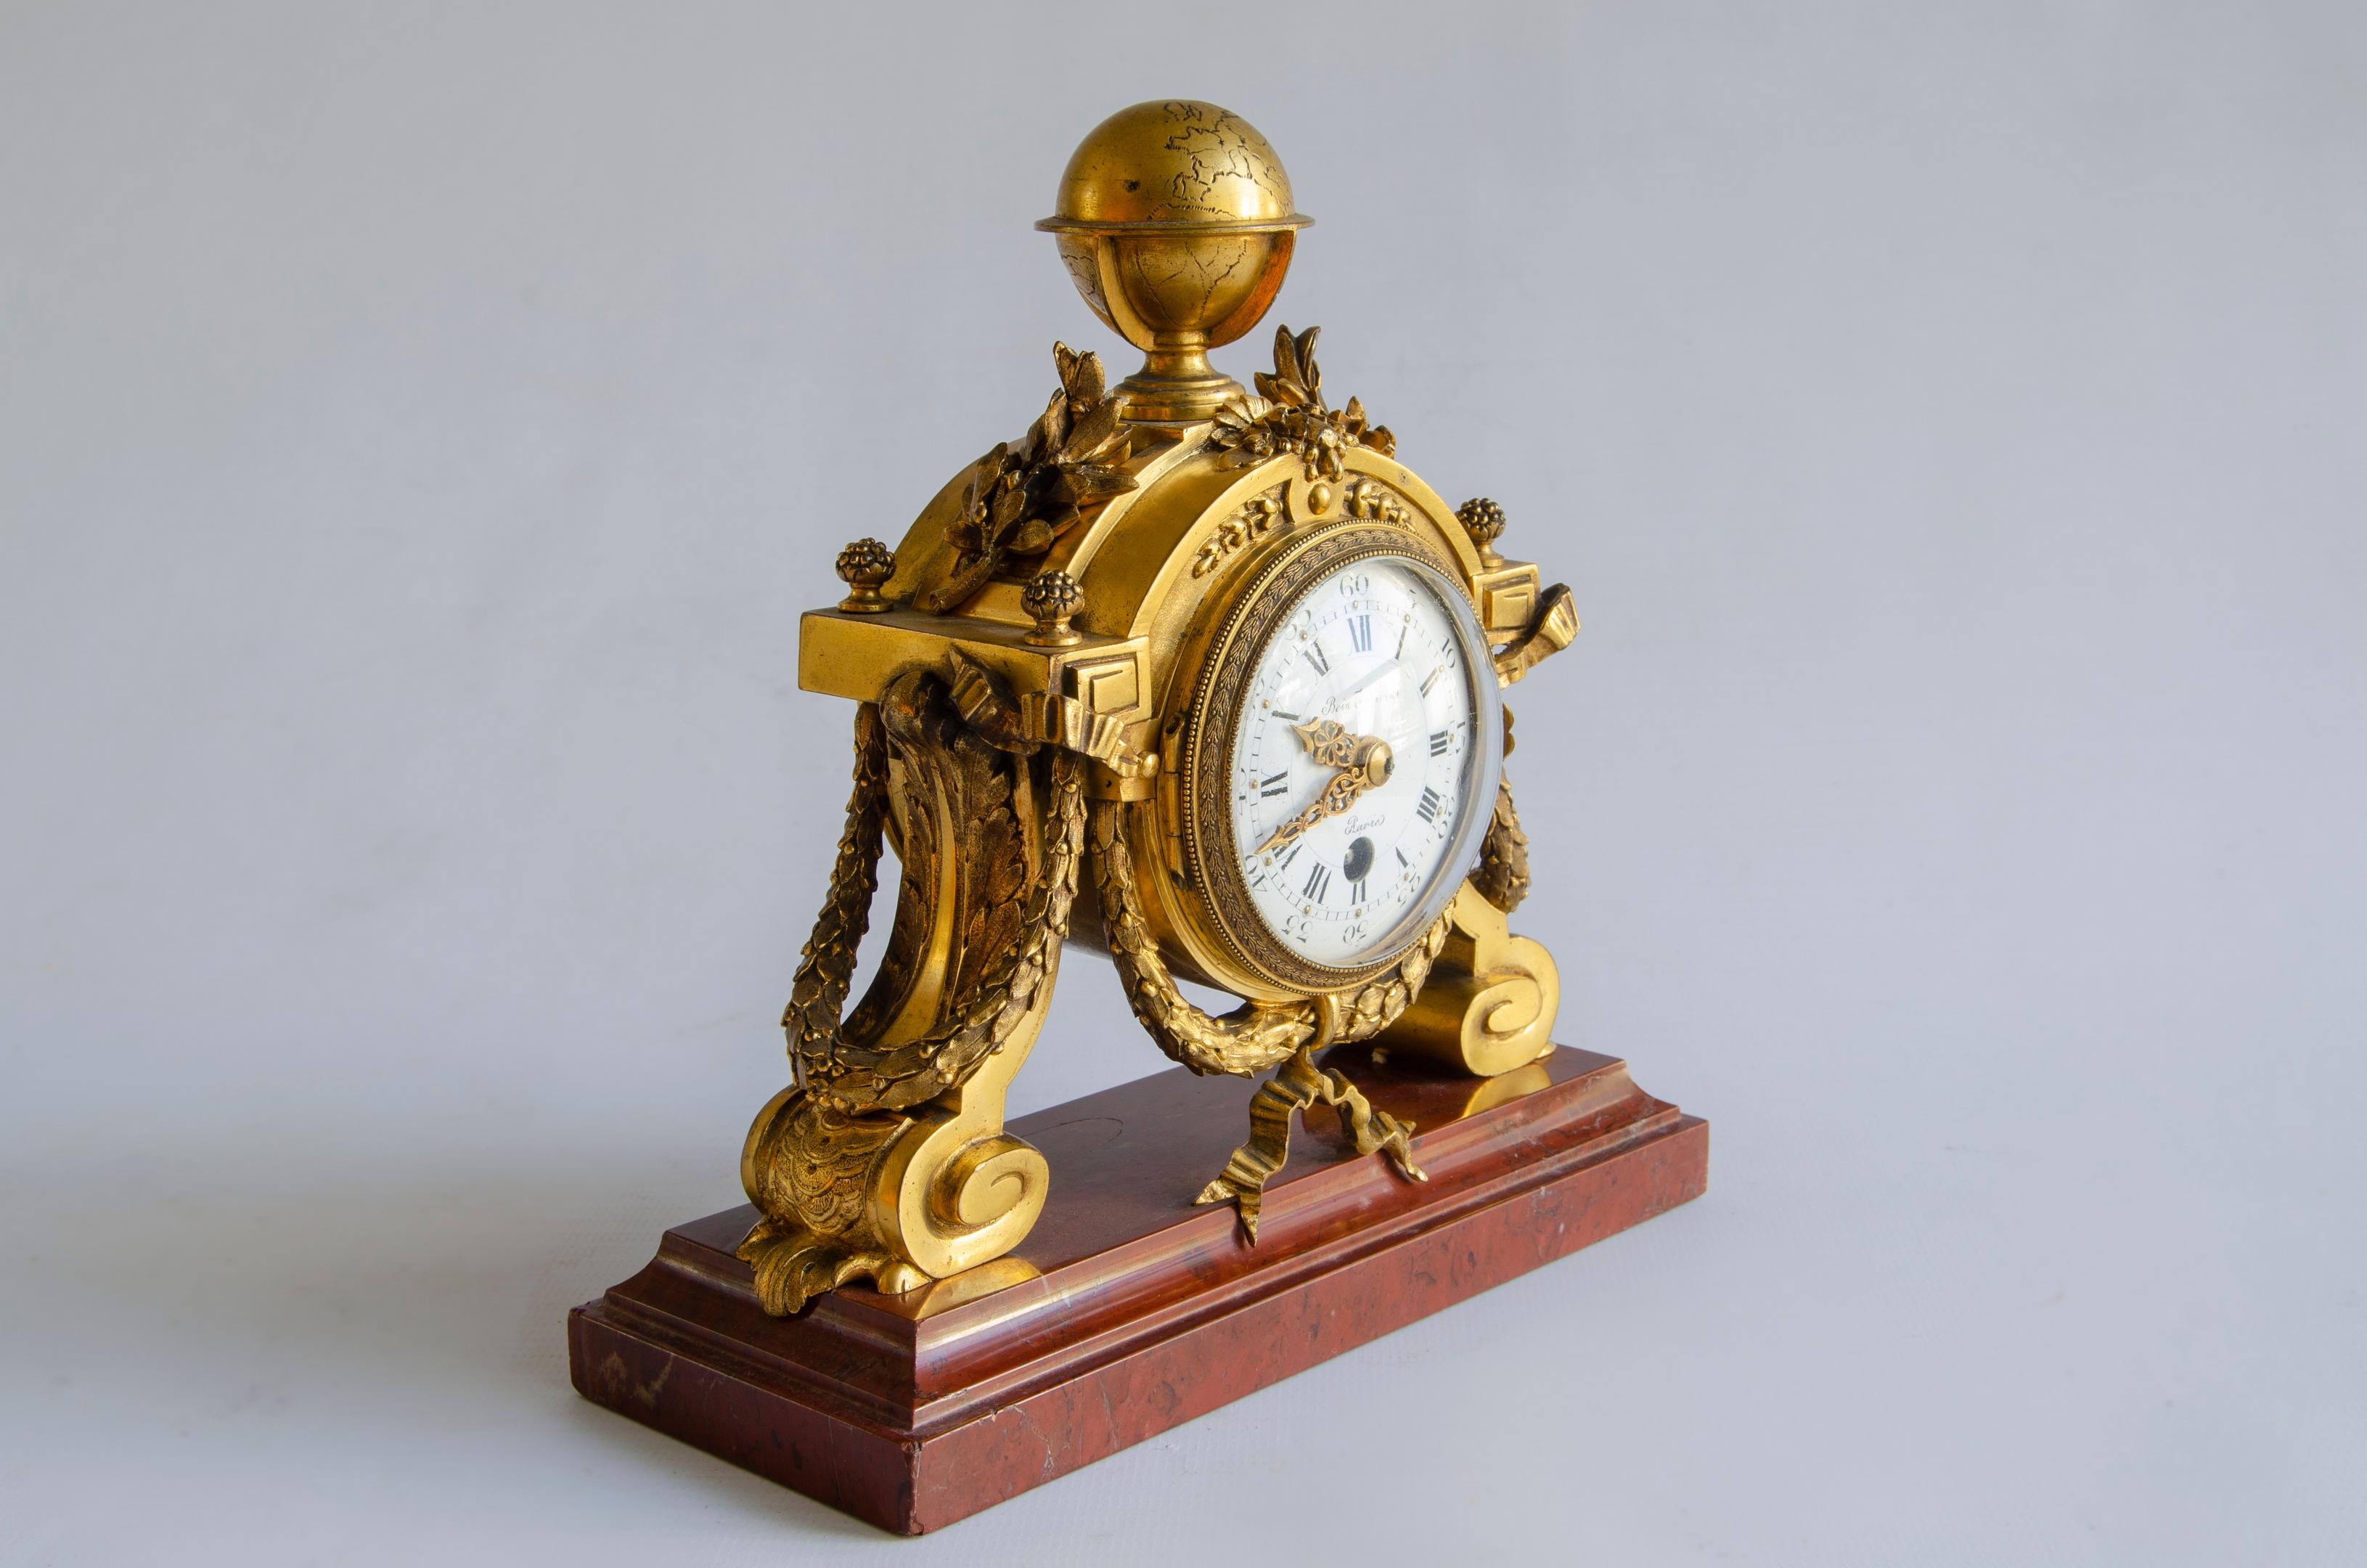 Boint tabletop clock stool
Origin France,
circa 1900
gilt bronze and royal rouge marble
a glass is missing on its back.